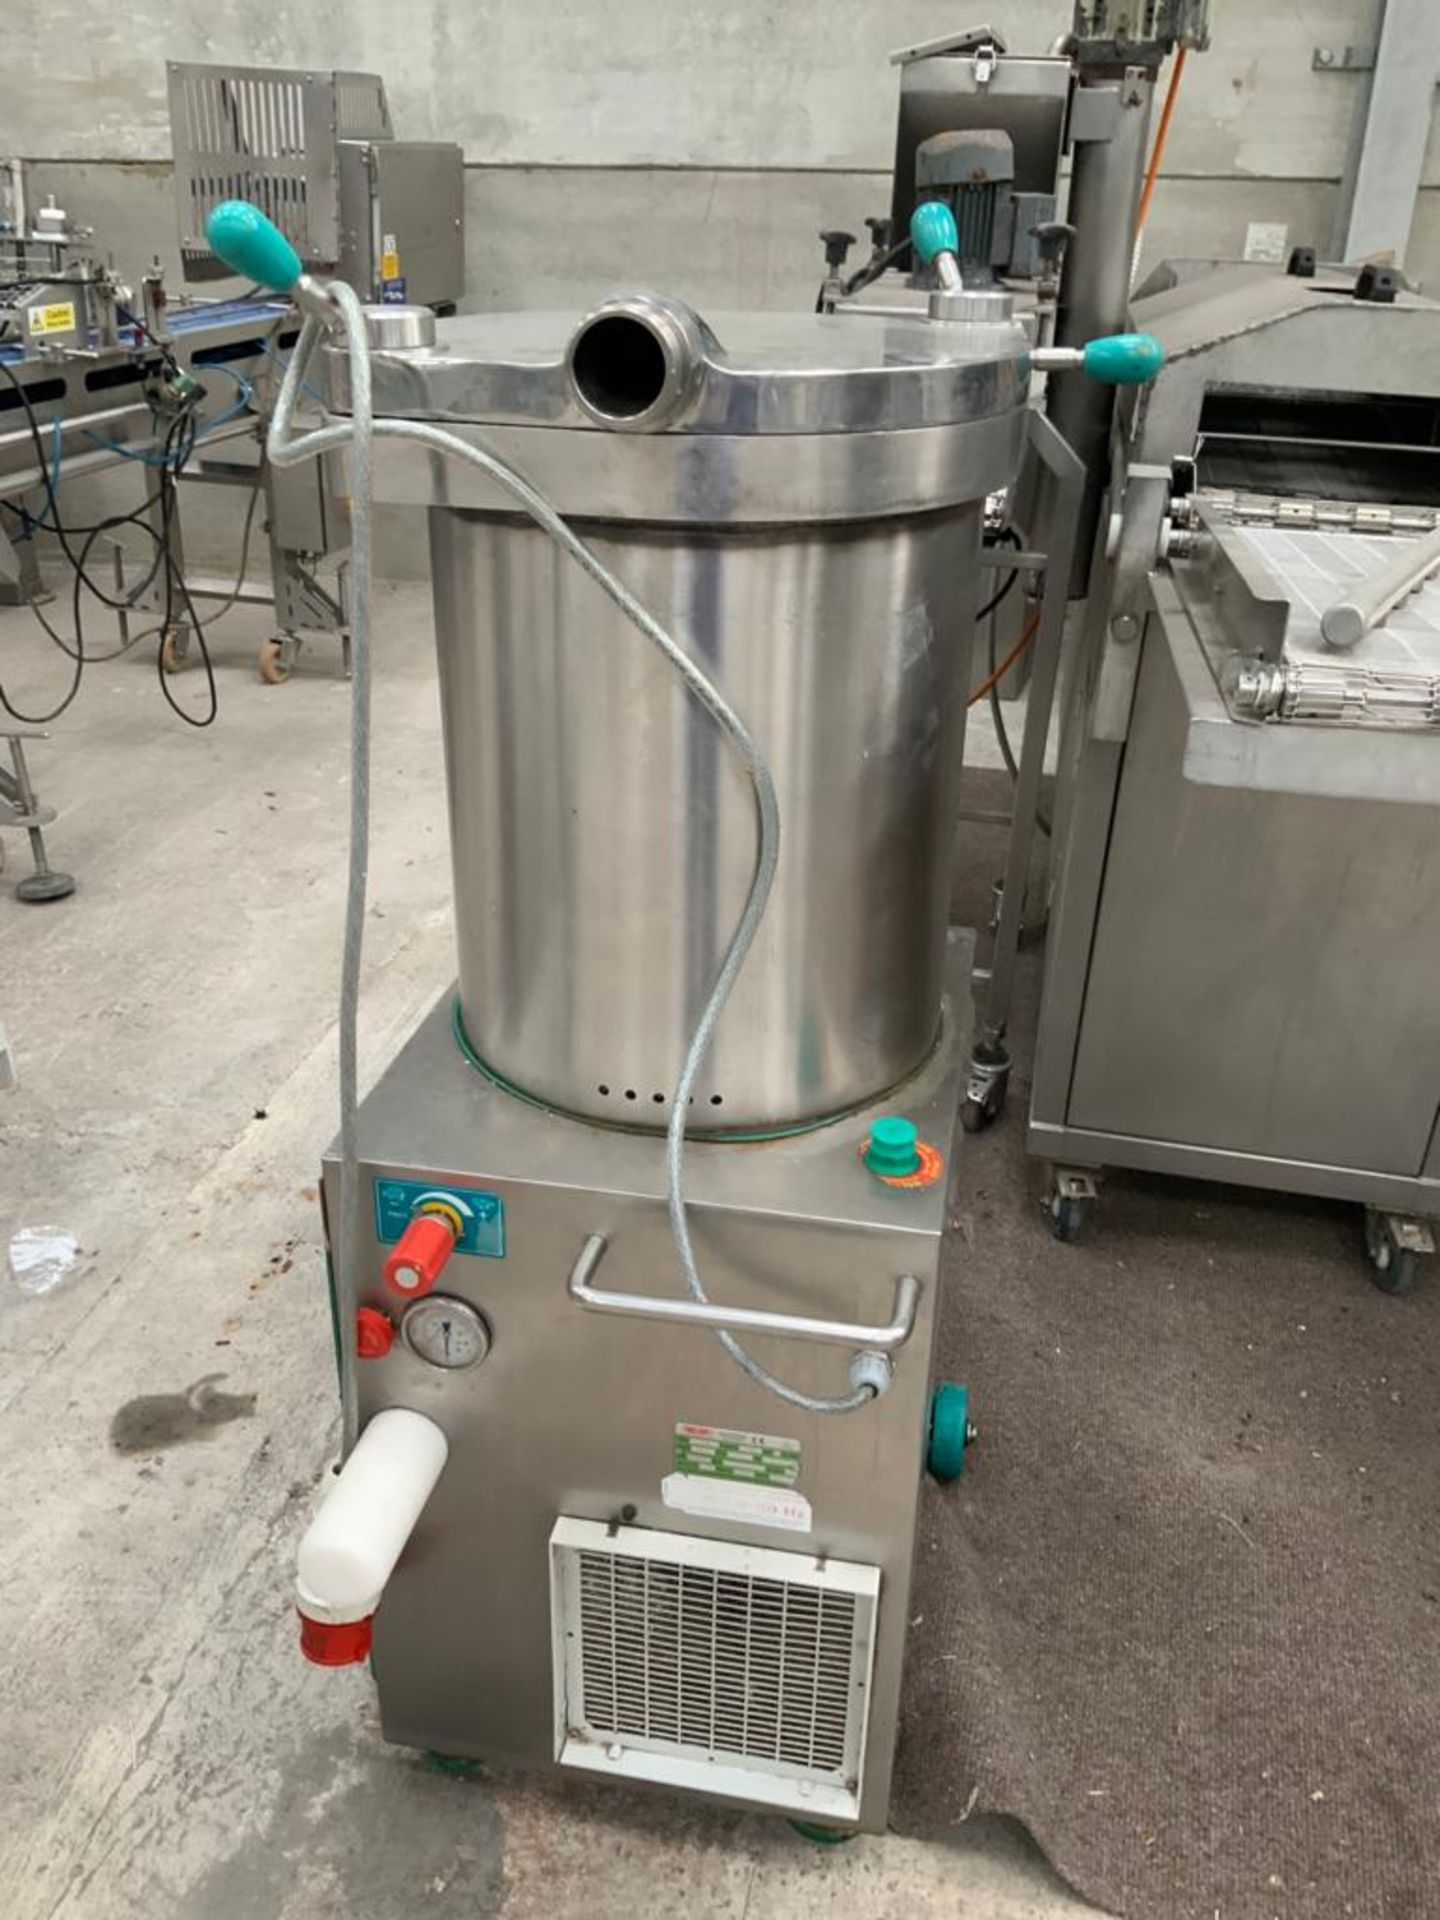 TALSA 52 LITRE SAUSAGE FILLER HYDRAULIC  3 PHASE  STAINLESS STEEL  2013 LOCATION N.IRELAND  SHIPPING - Image 7 of 9